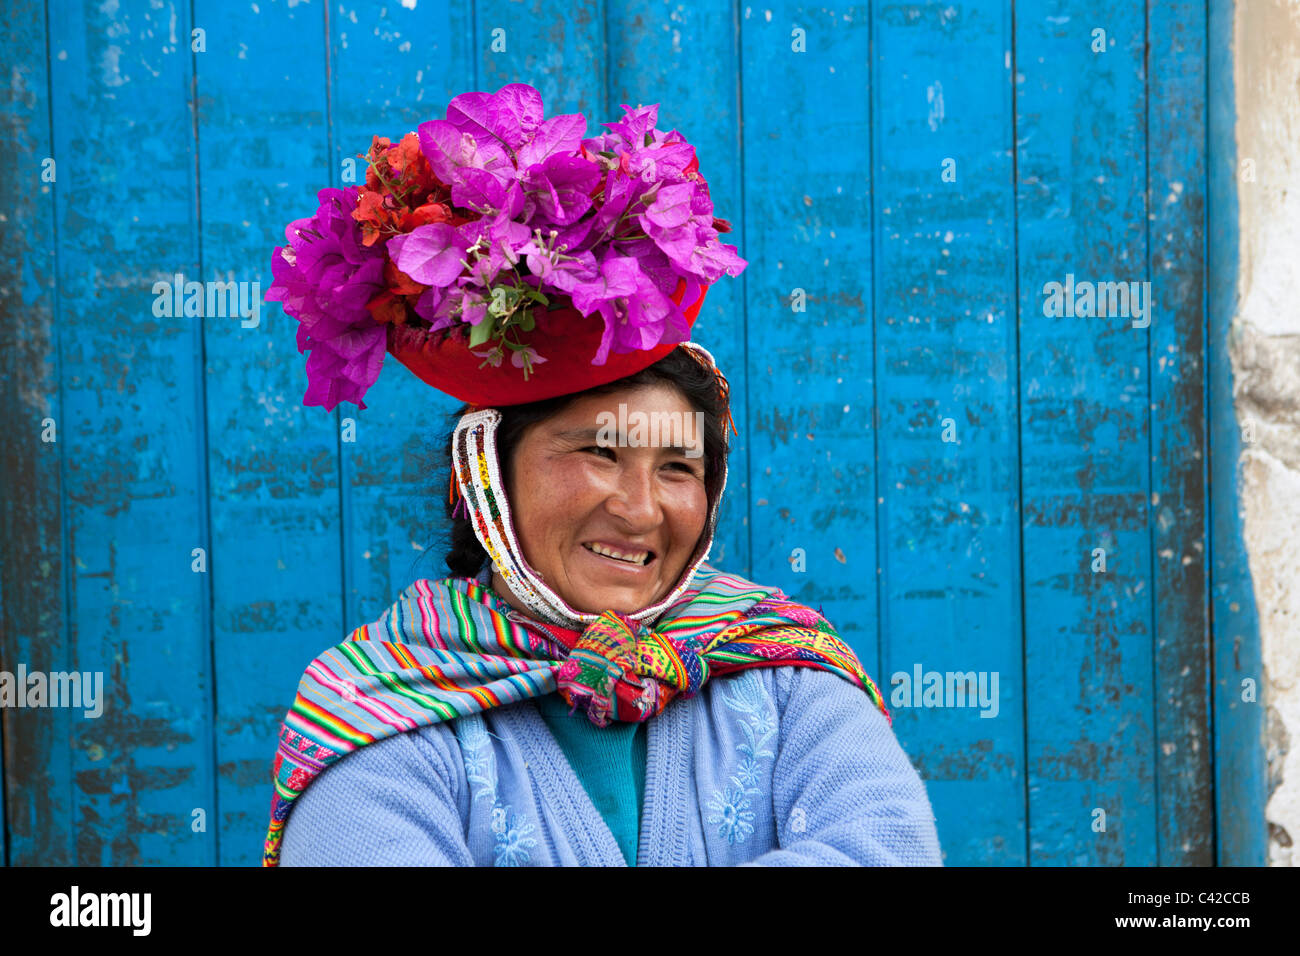 Peru, Ollantaytambo, Indian woman with flowers in hat, an Indian custom. Stock Photo